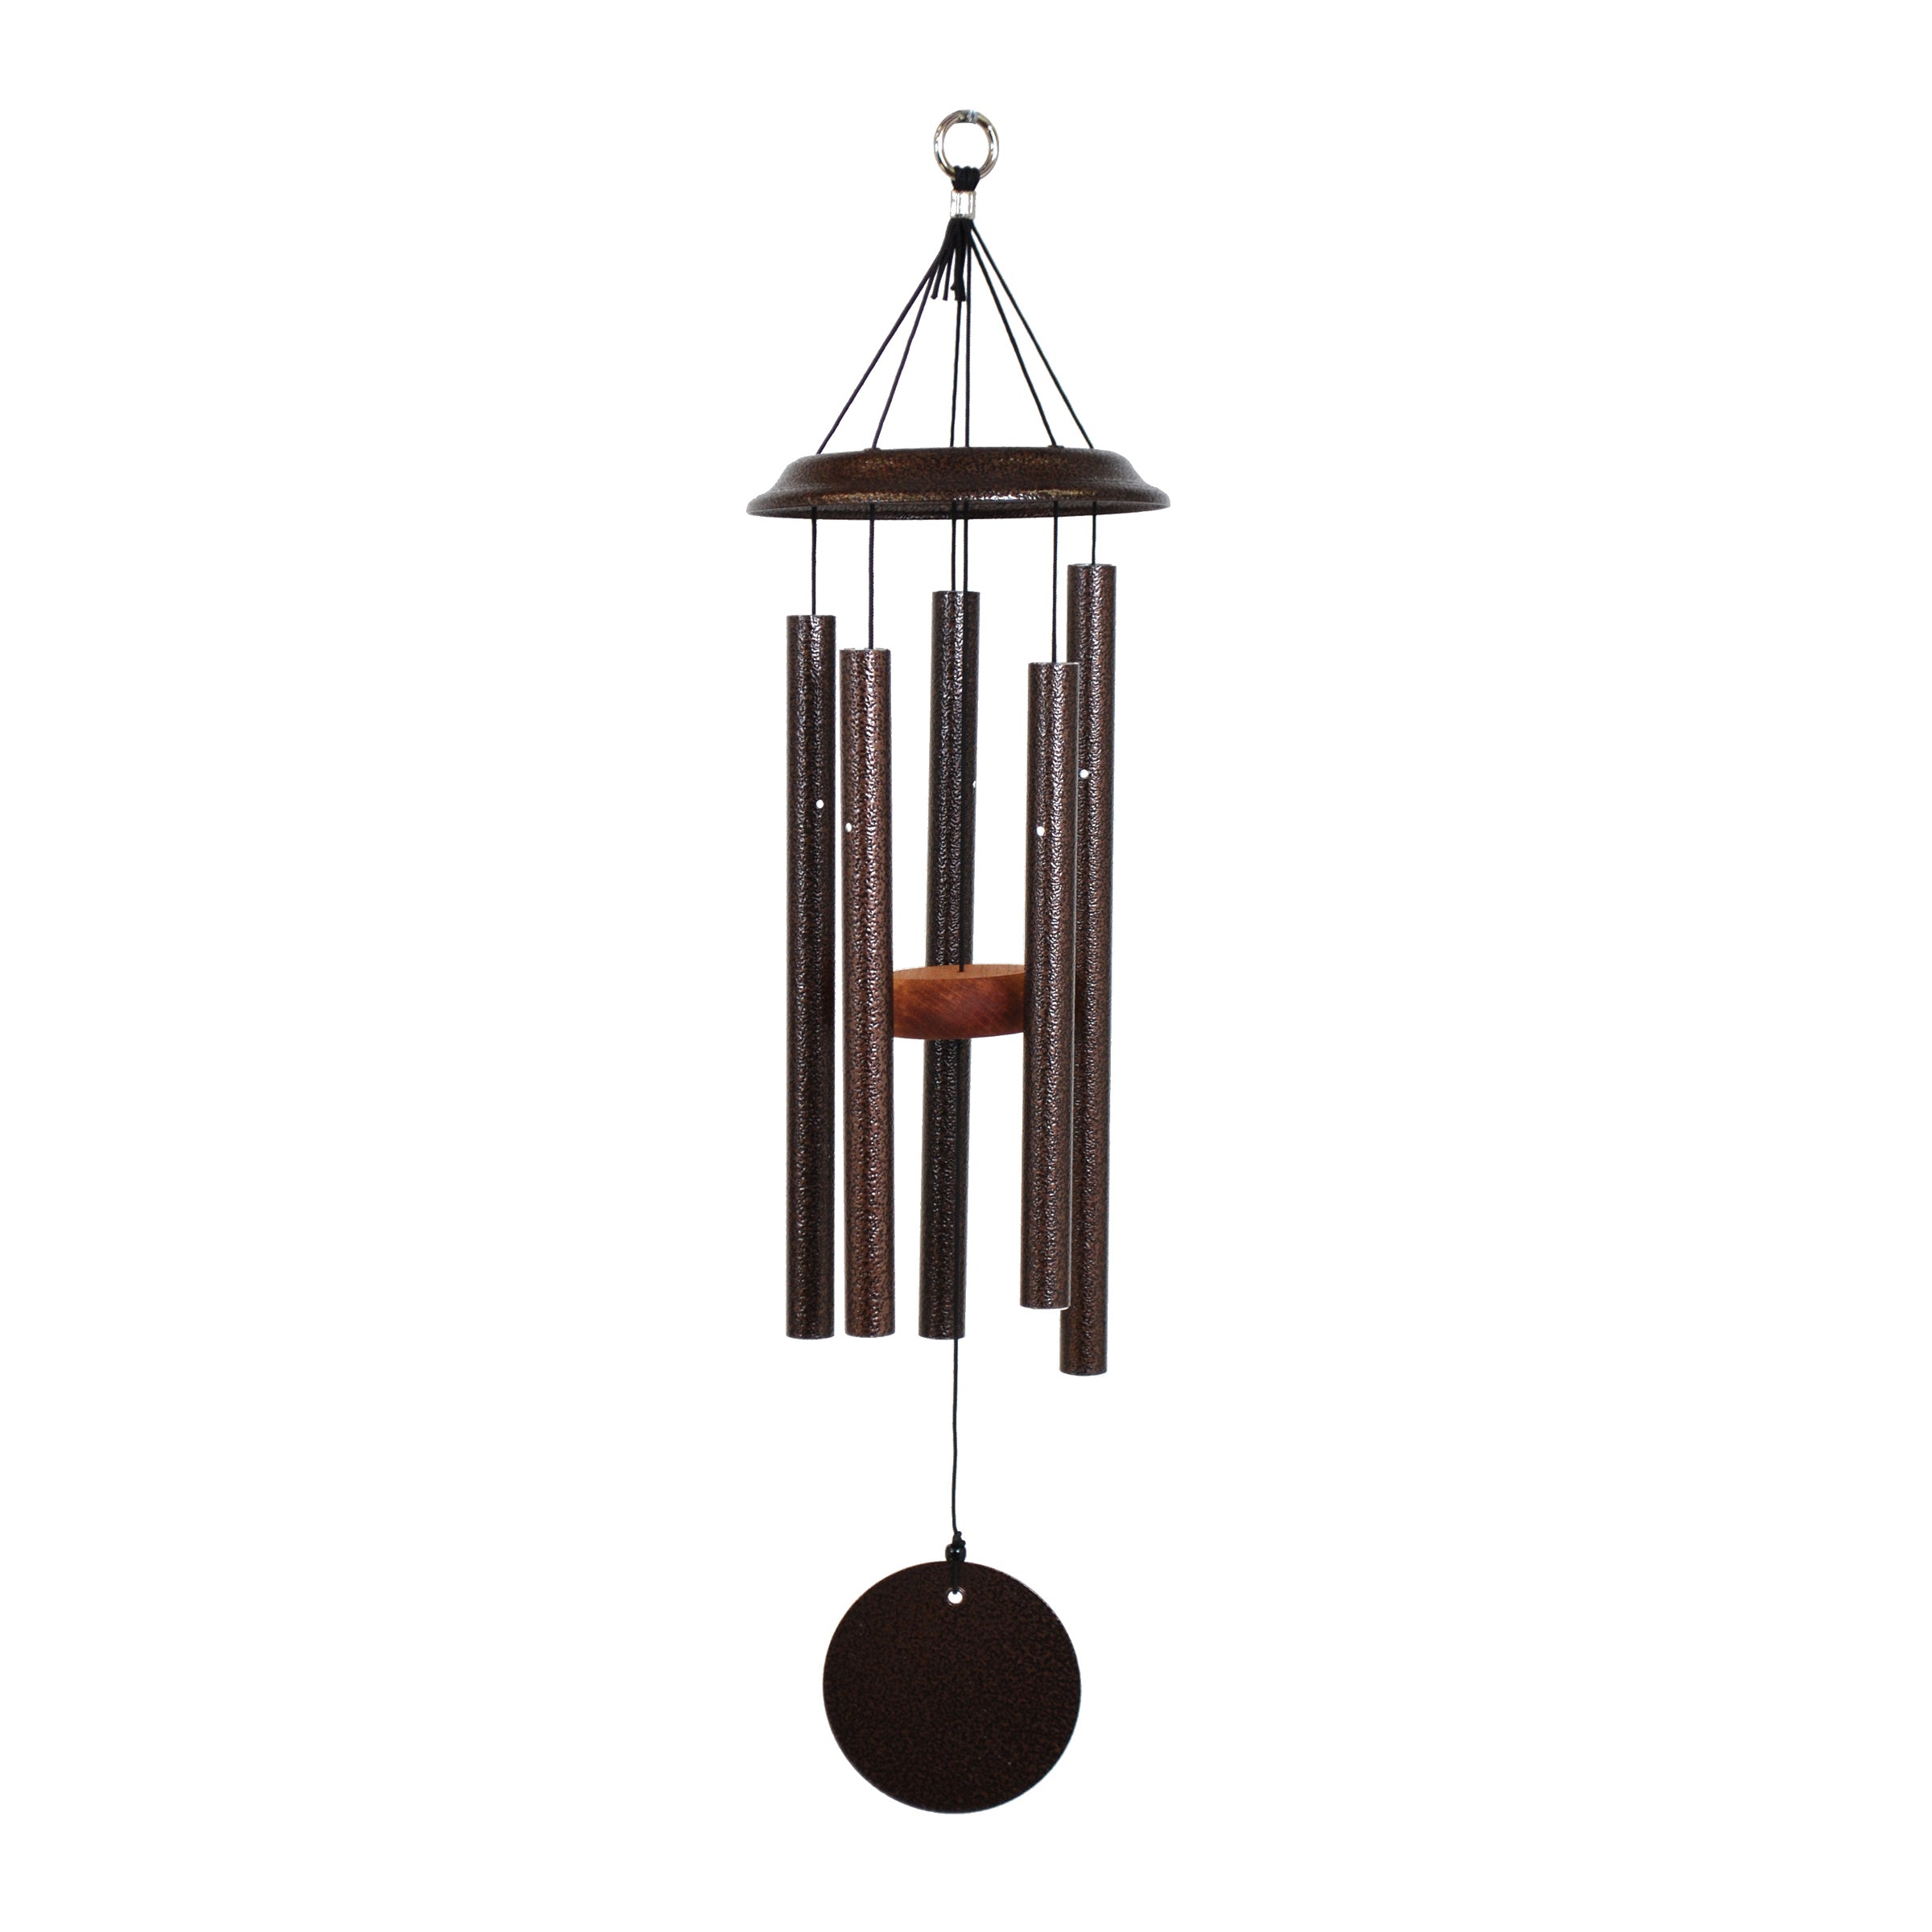 Wind River Shenandoah Melodies® 26 inch wind chimes